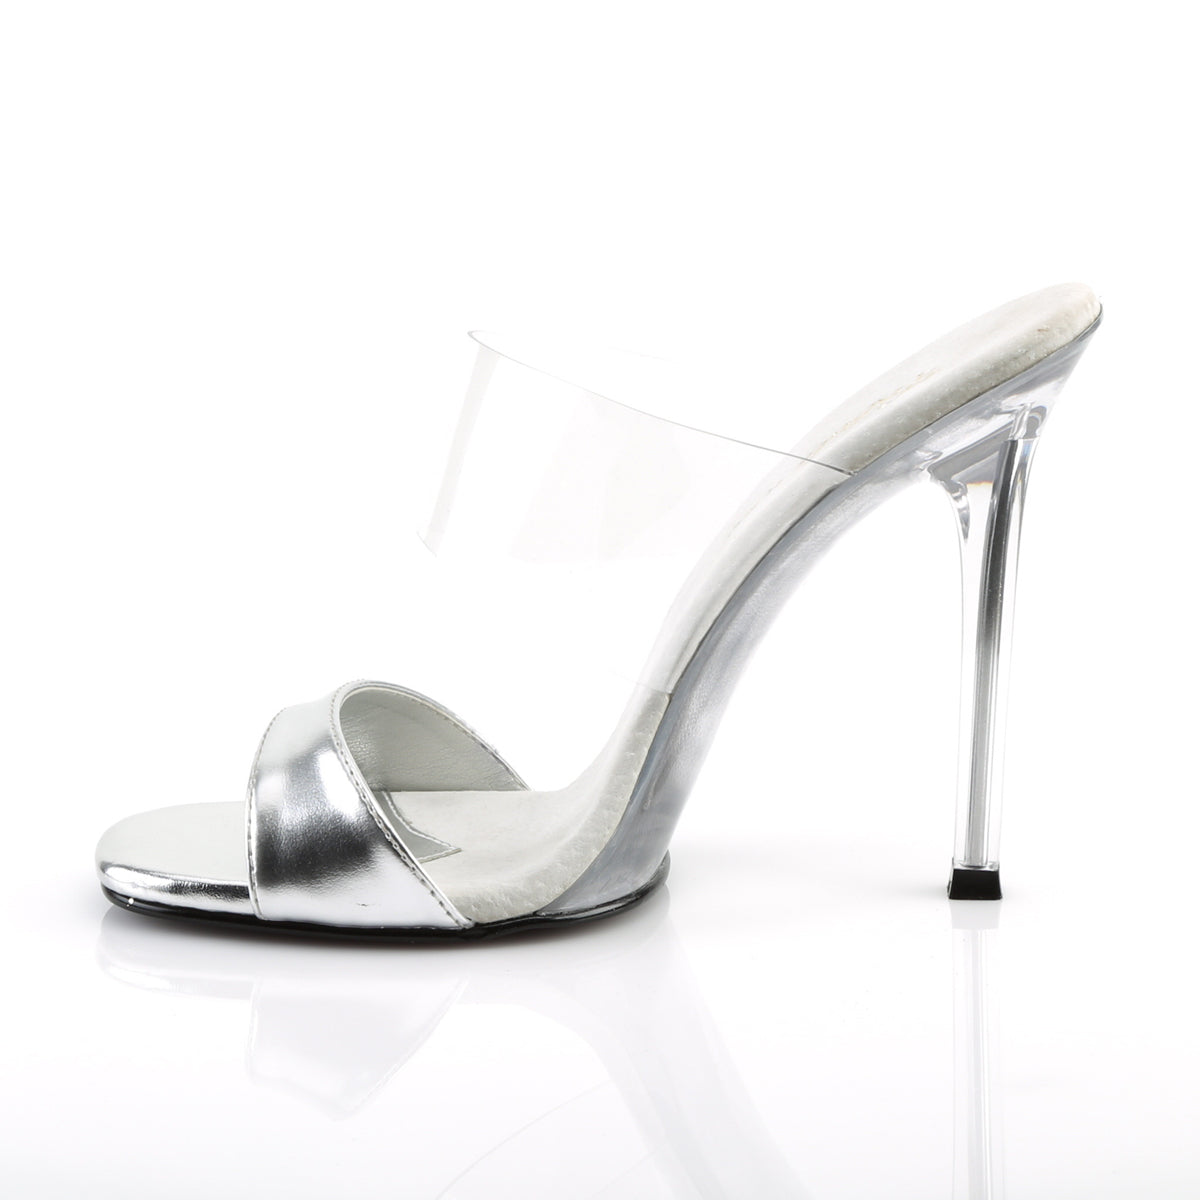 GALA-02L Fabulicious 4.5 Inch Heel Silver Sexy Shoes-Fabulicious- Sexy Shoes Pole Dance Heels